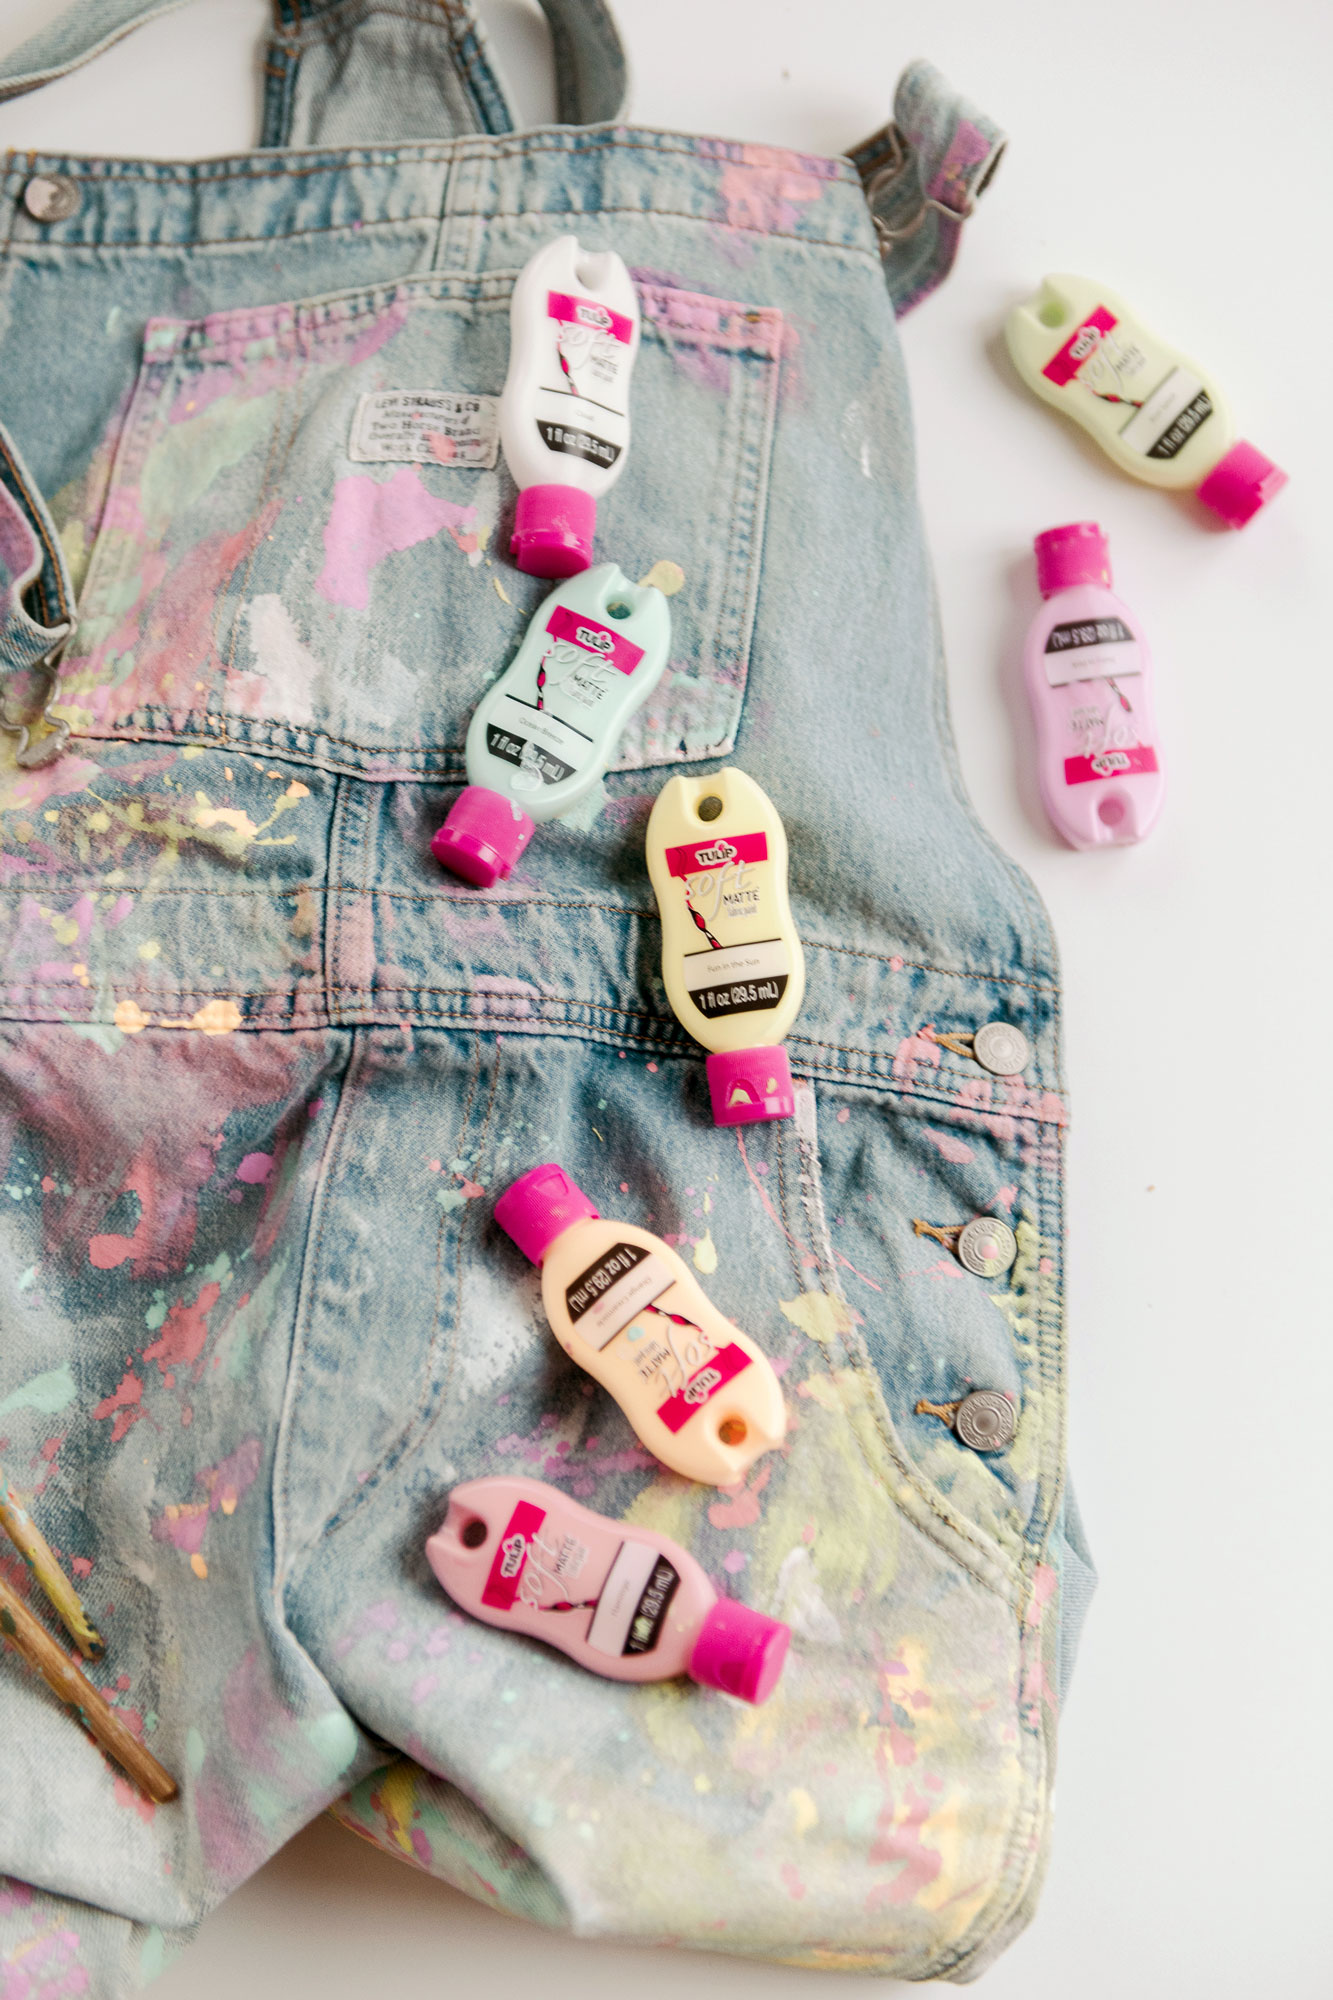 DIY splatter painted overalls, painted overalls, DIY splatter painted clothing, how to splatter paint clothing, the best paint for painting clothing, how to paint clothing